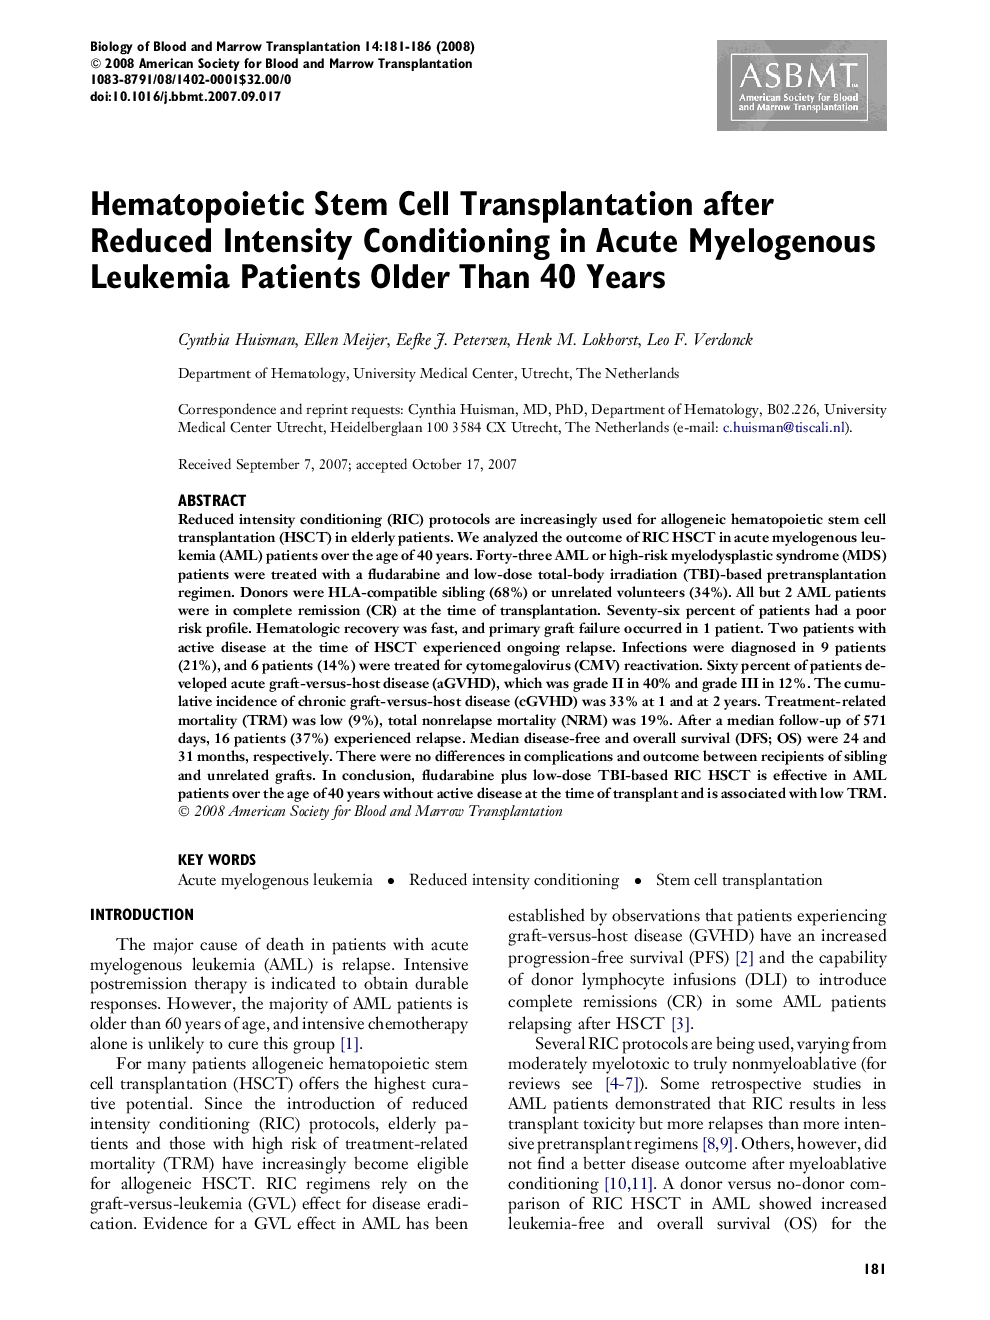 Hematopoietic Stem Cell Transplantation after Reduced Intensity Conditioning in Acute Myelogenous Leukemia Patients Older Than 40 Years